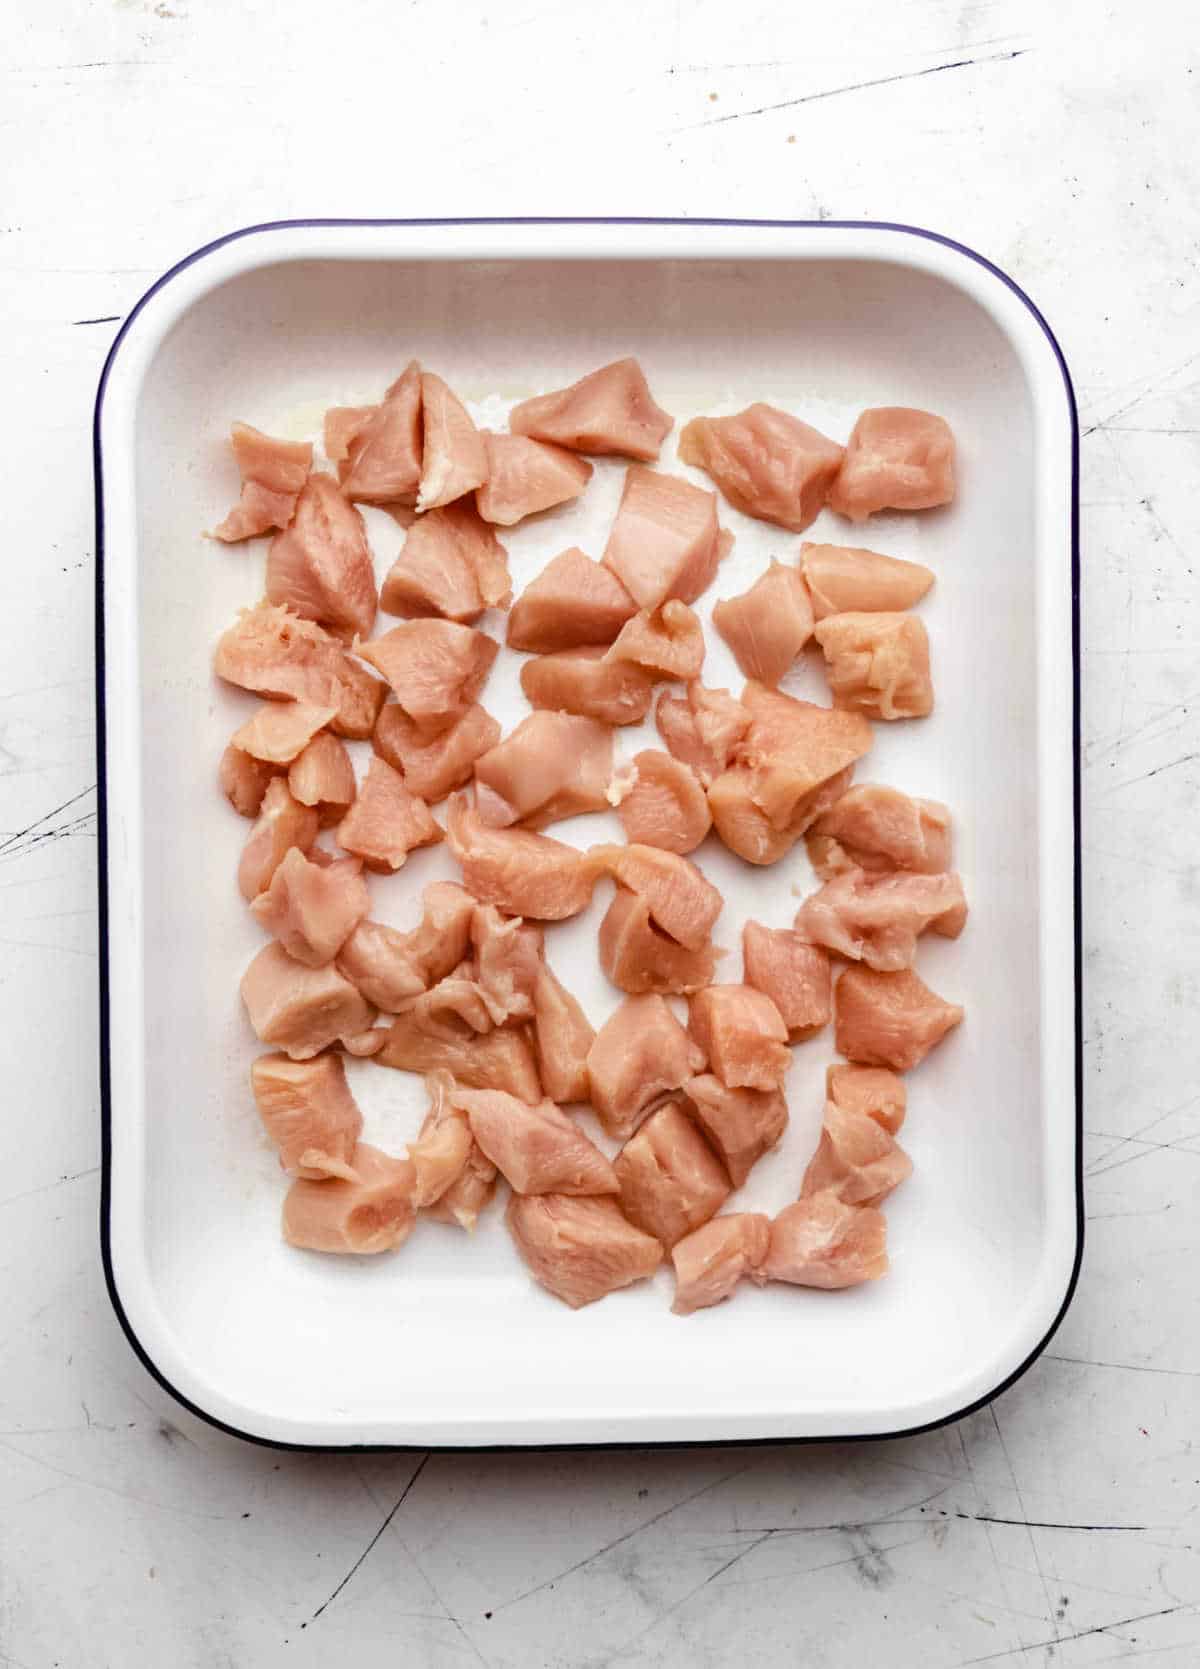 Pieces of raw chicken in a white baking dish.